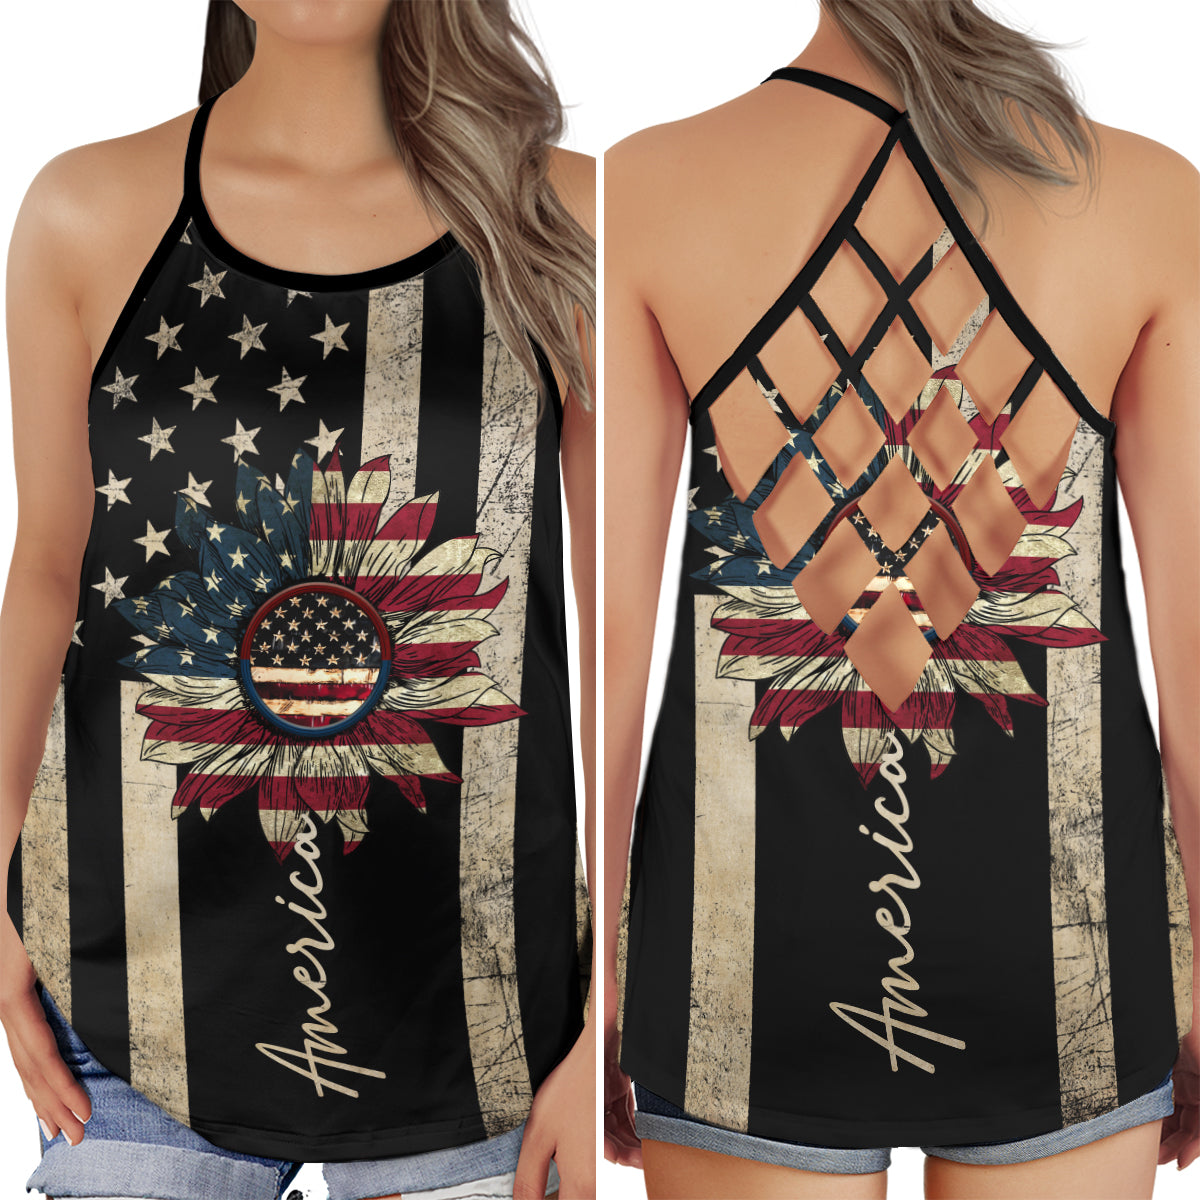 S America Independence Day Happiness Sunflower - Cross Open Back Tank Top - Owls Matrix LTD